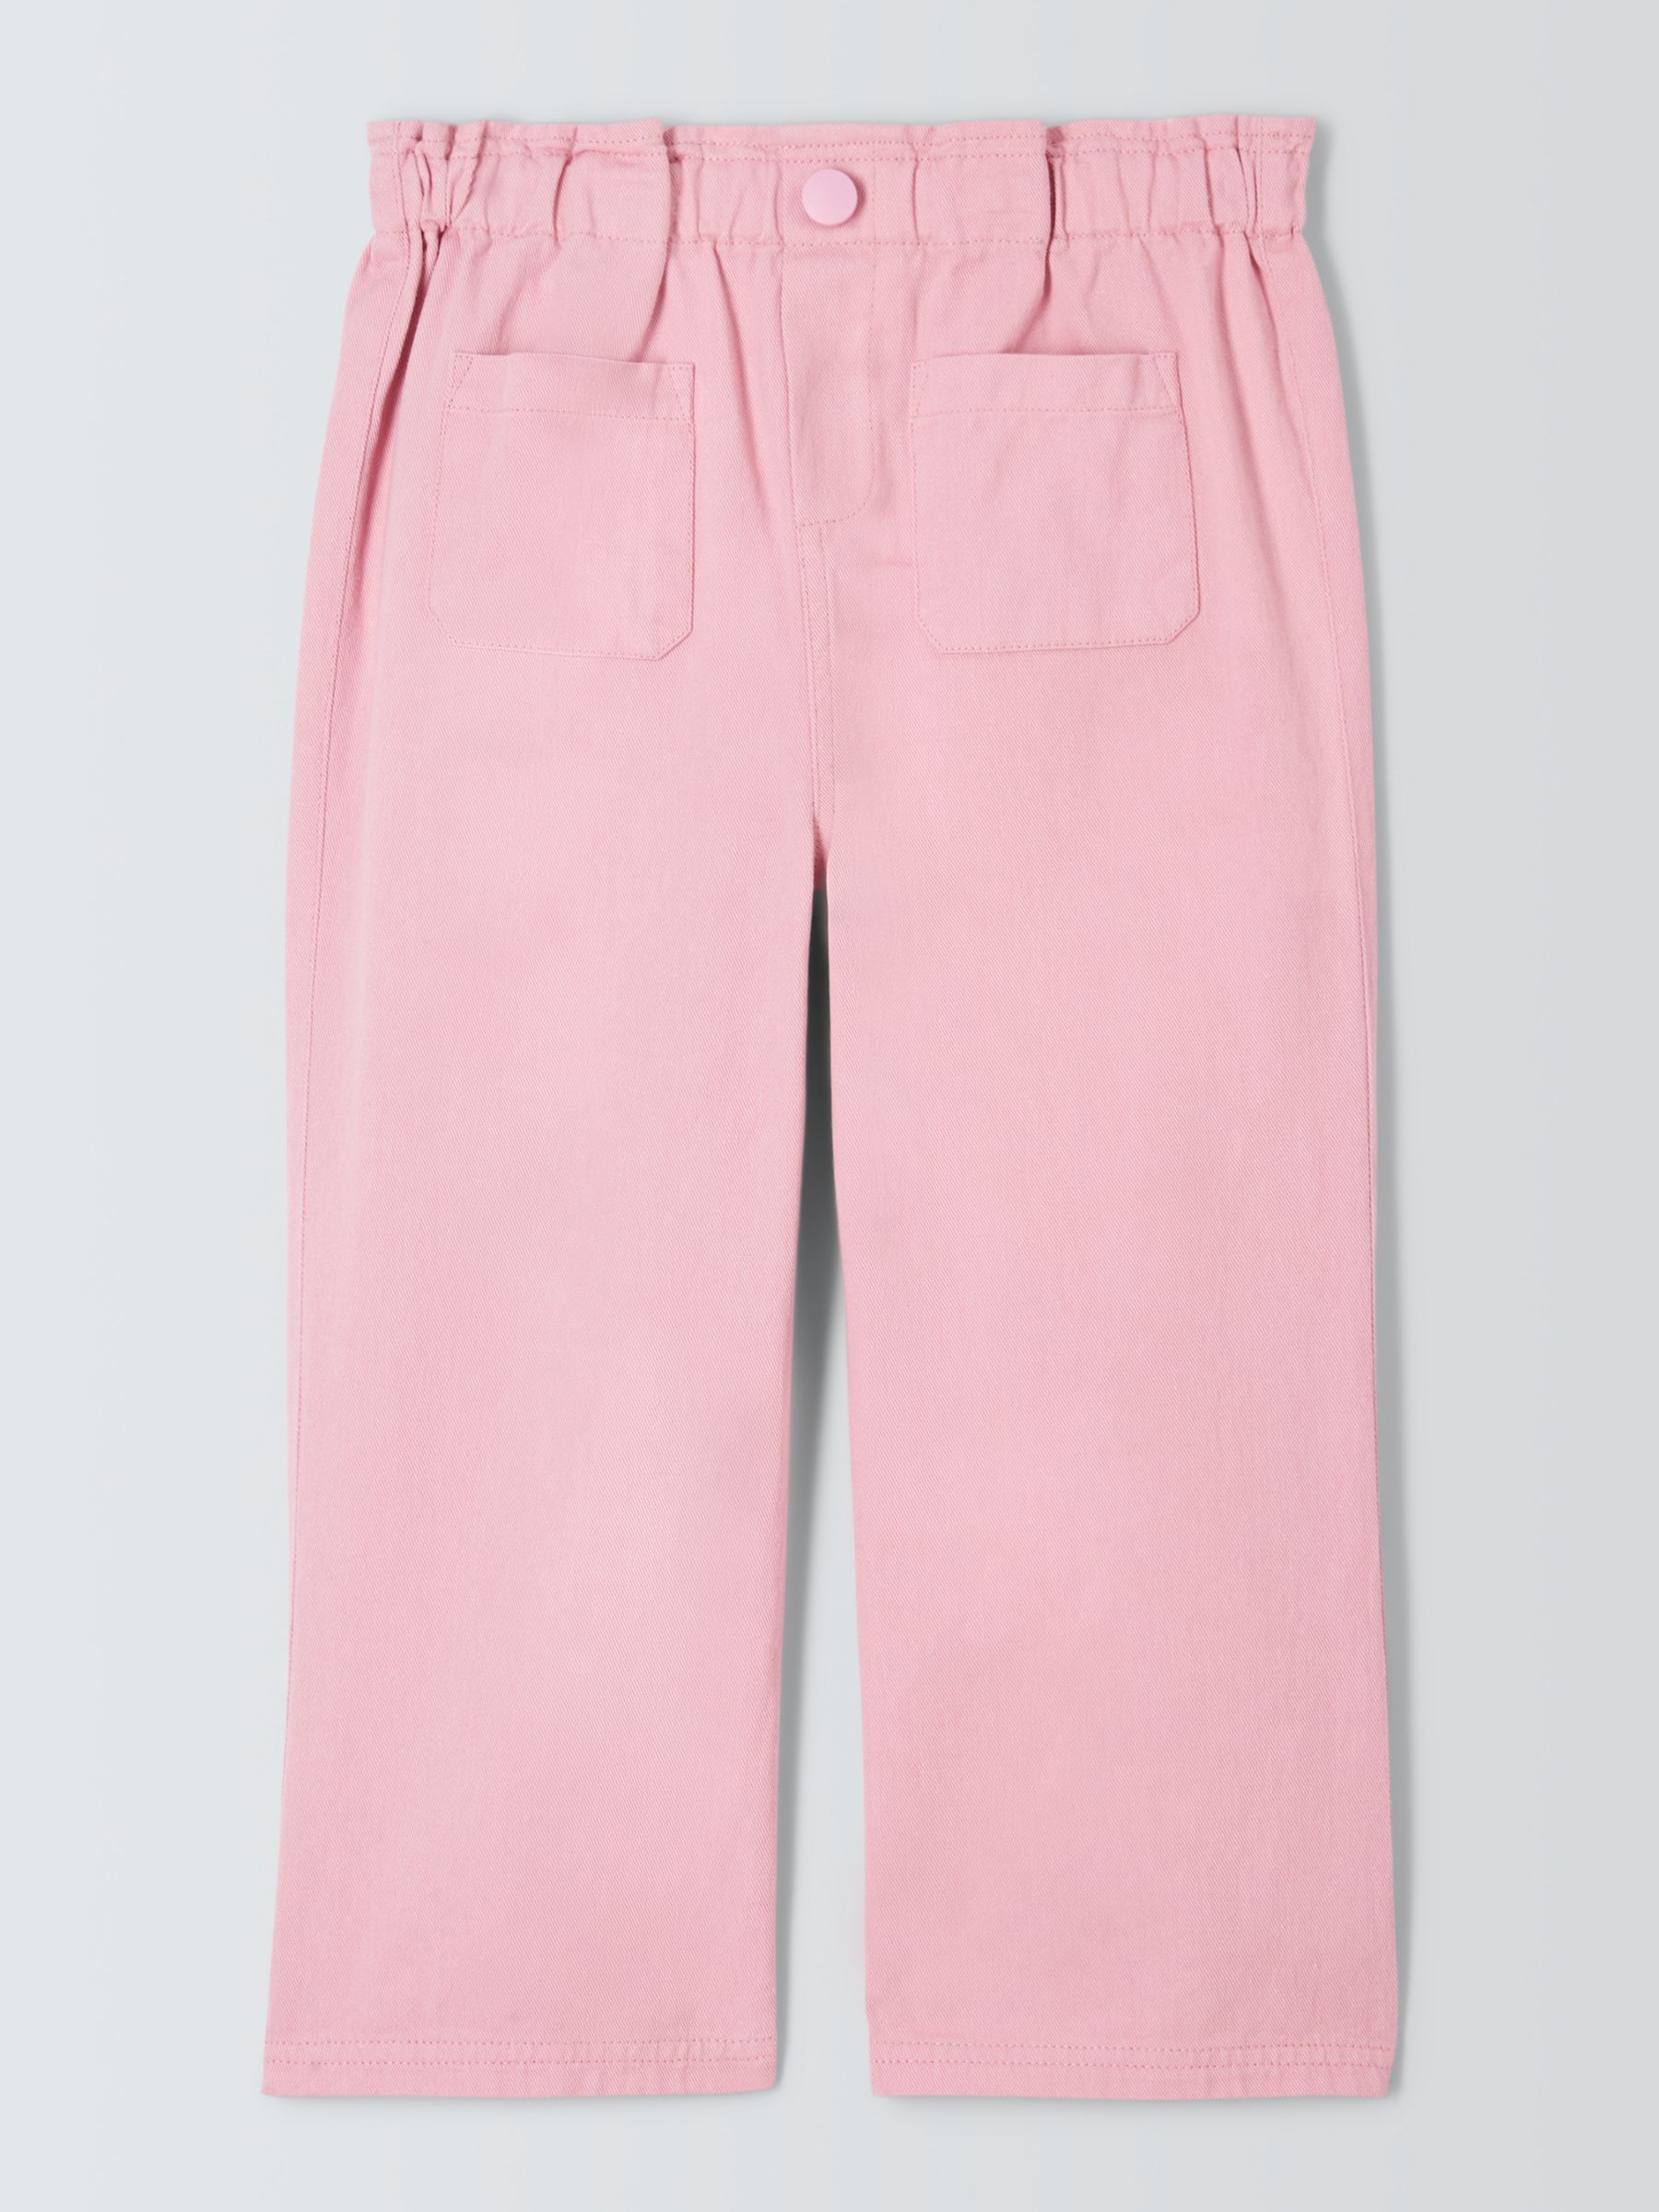 John Lewis Baby Cotton Trousers, Pink, 9-12 months